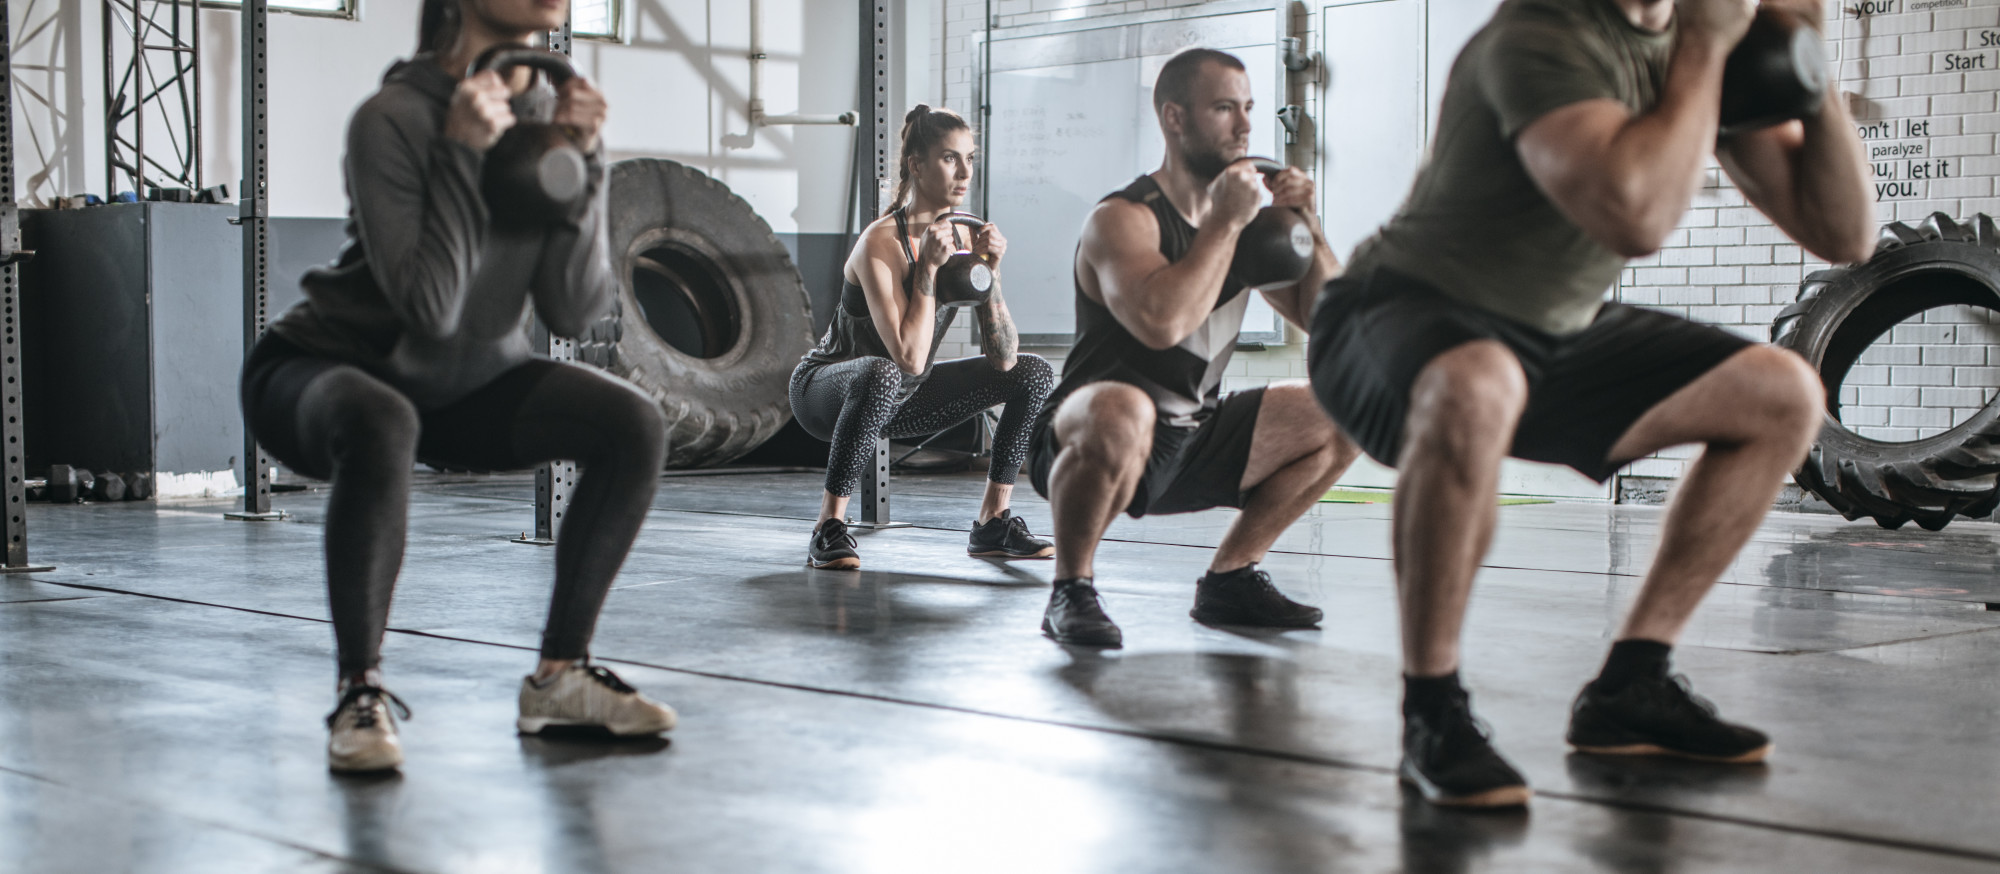 5 of the Best Fitness Classes To Try in 2021 - VIM